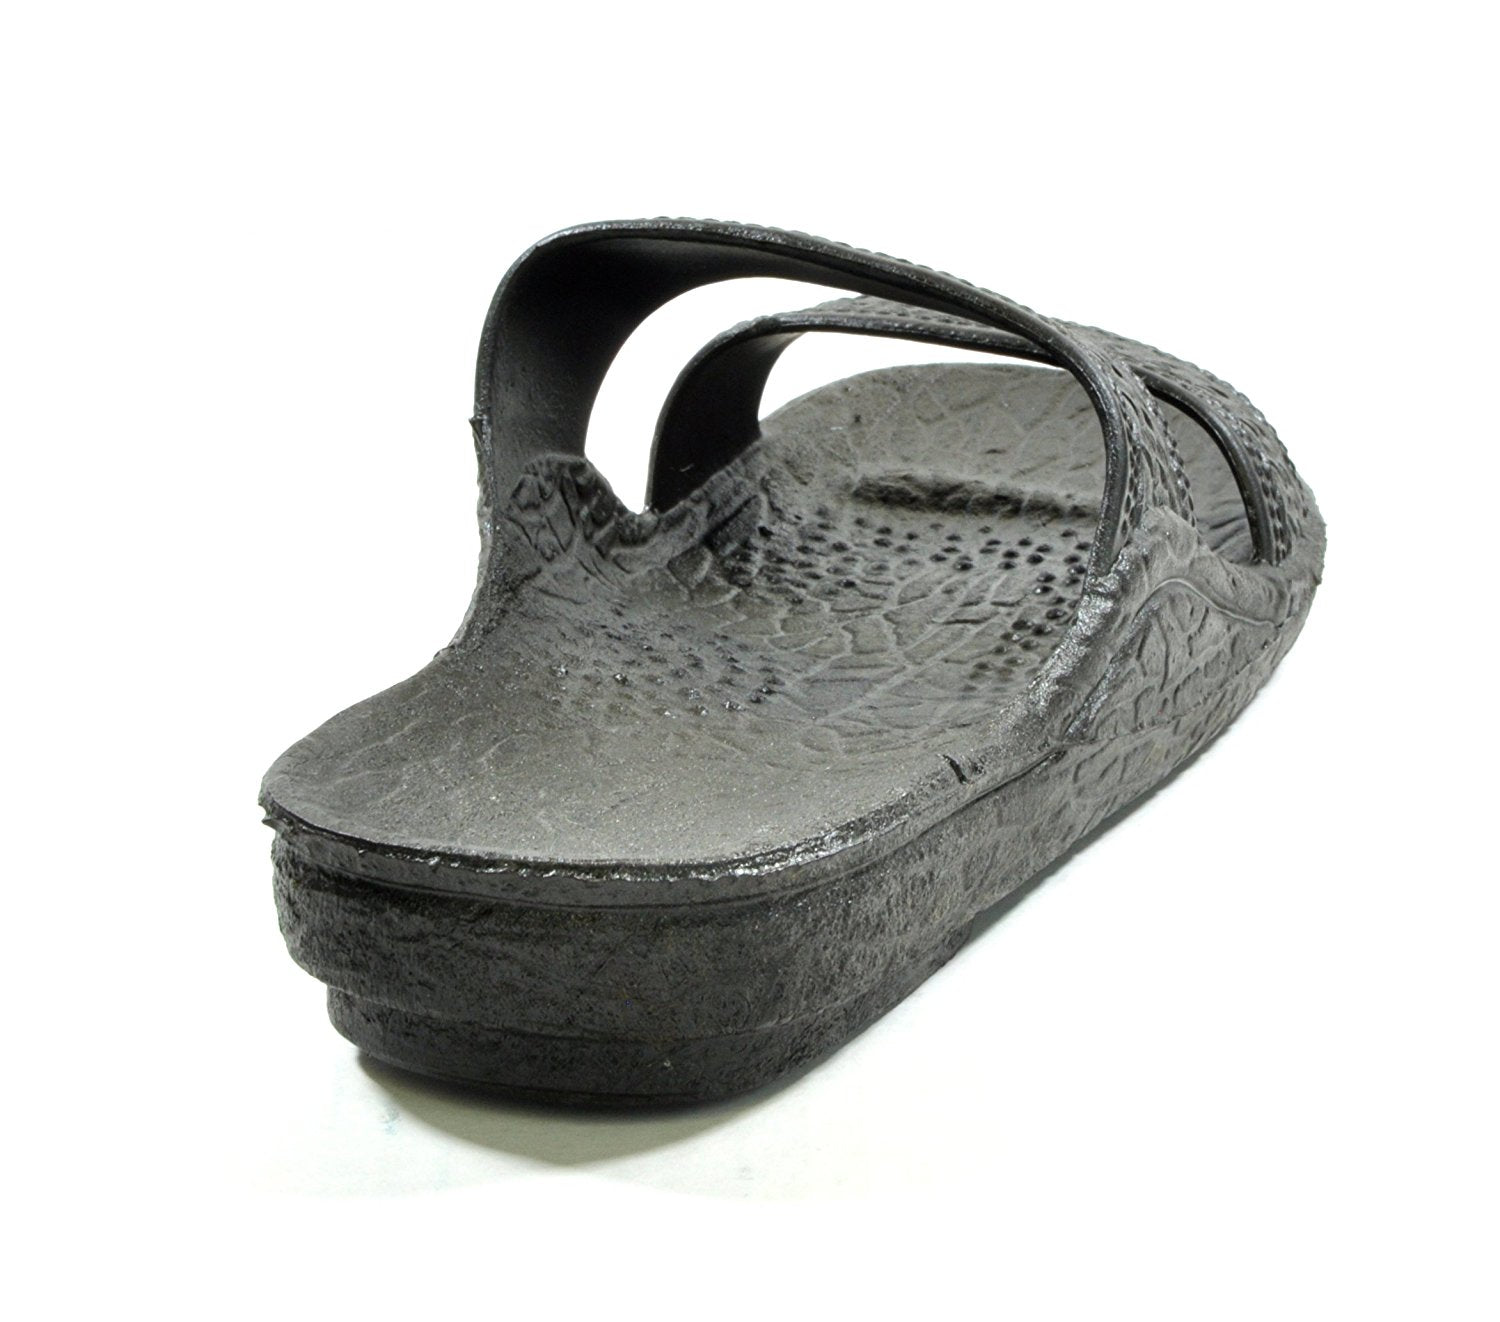 Moses Rubber Slides | Black Brown Jesus Slippers - AlohaShoes.com